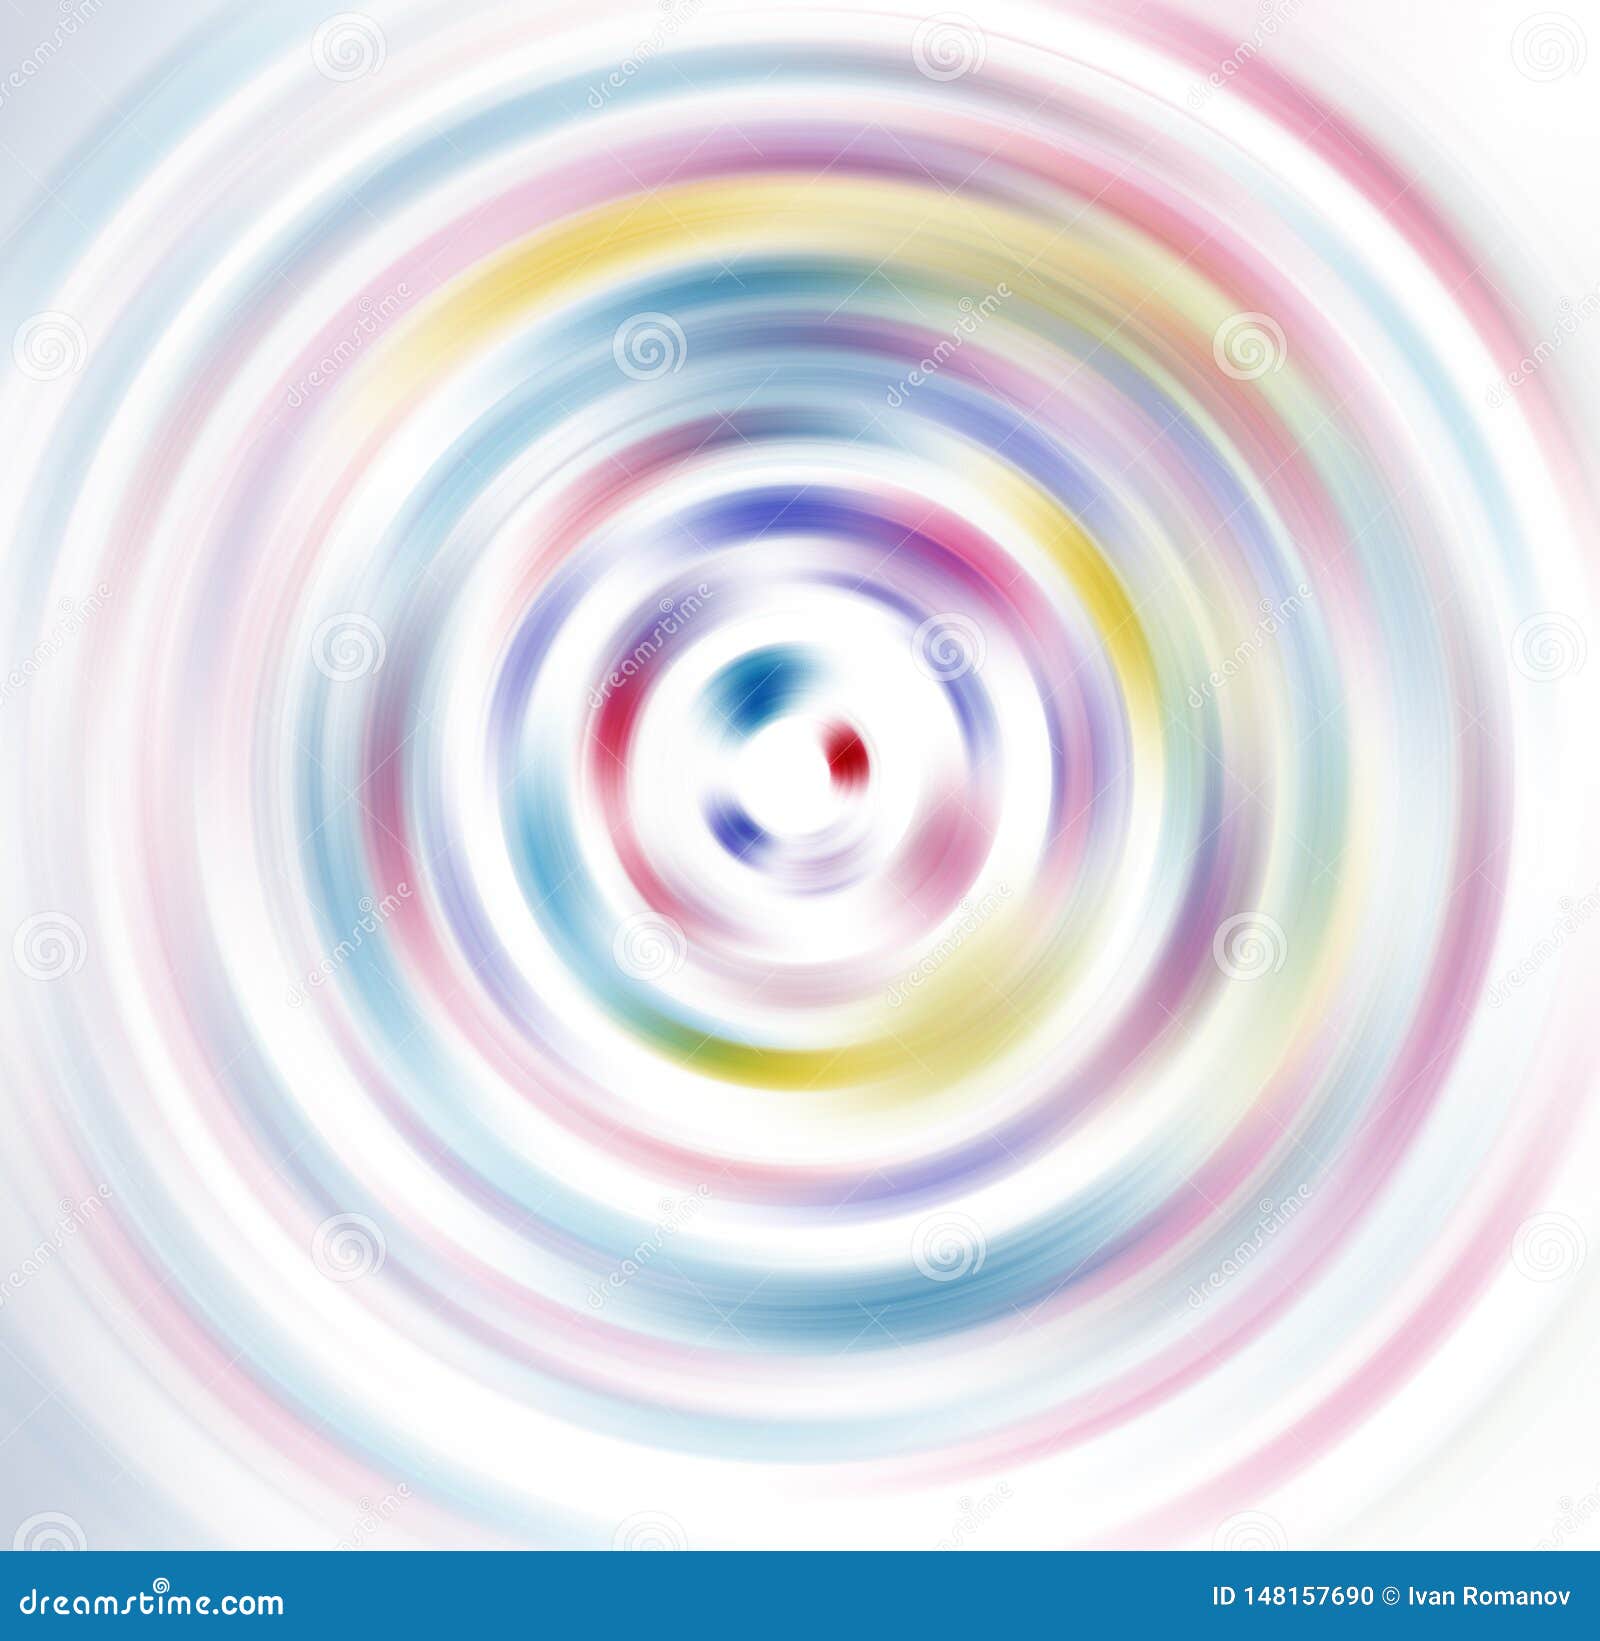 Abstract Background of Spin Circle Radial Motion Blur Stock Photo ...